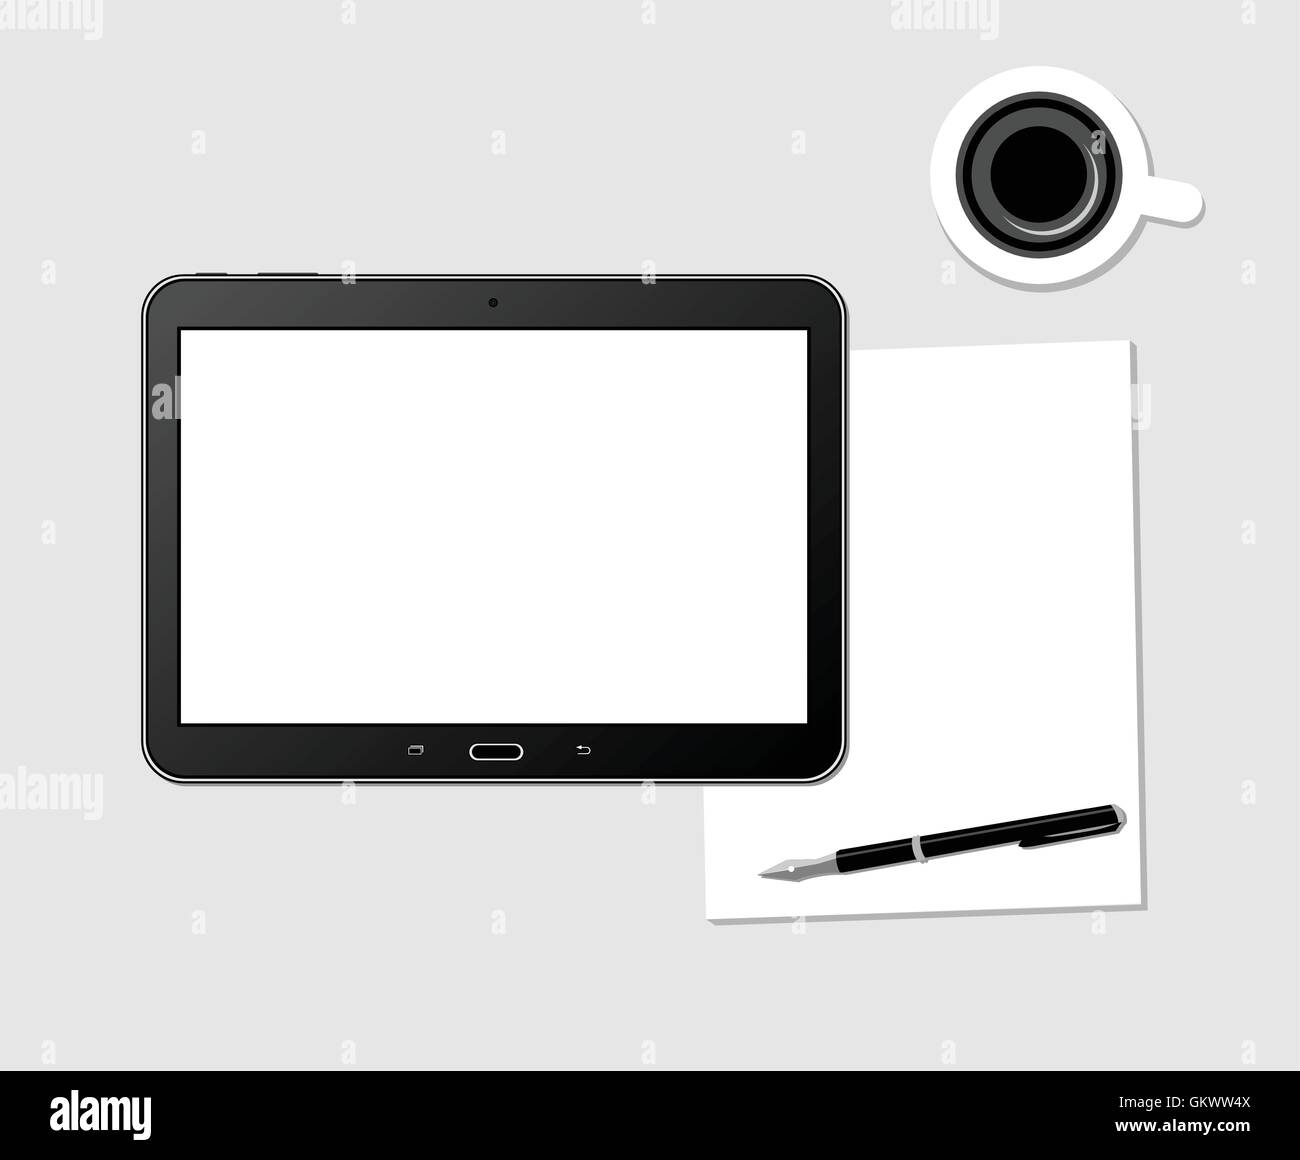 Workplace With Blank Digital Tablet Stock Vector